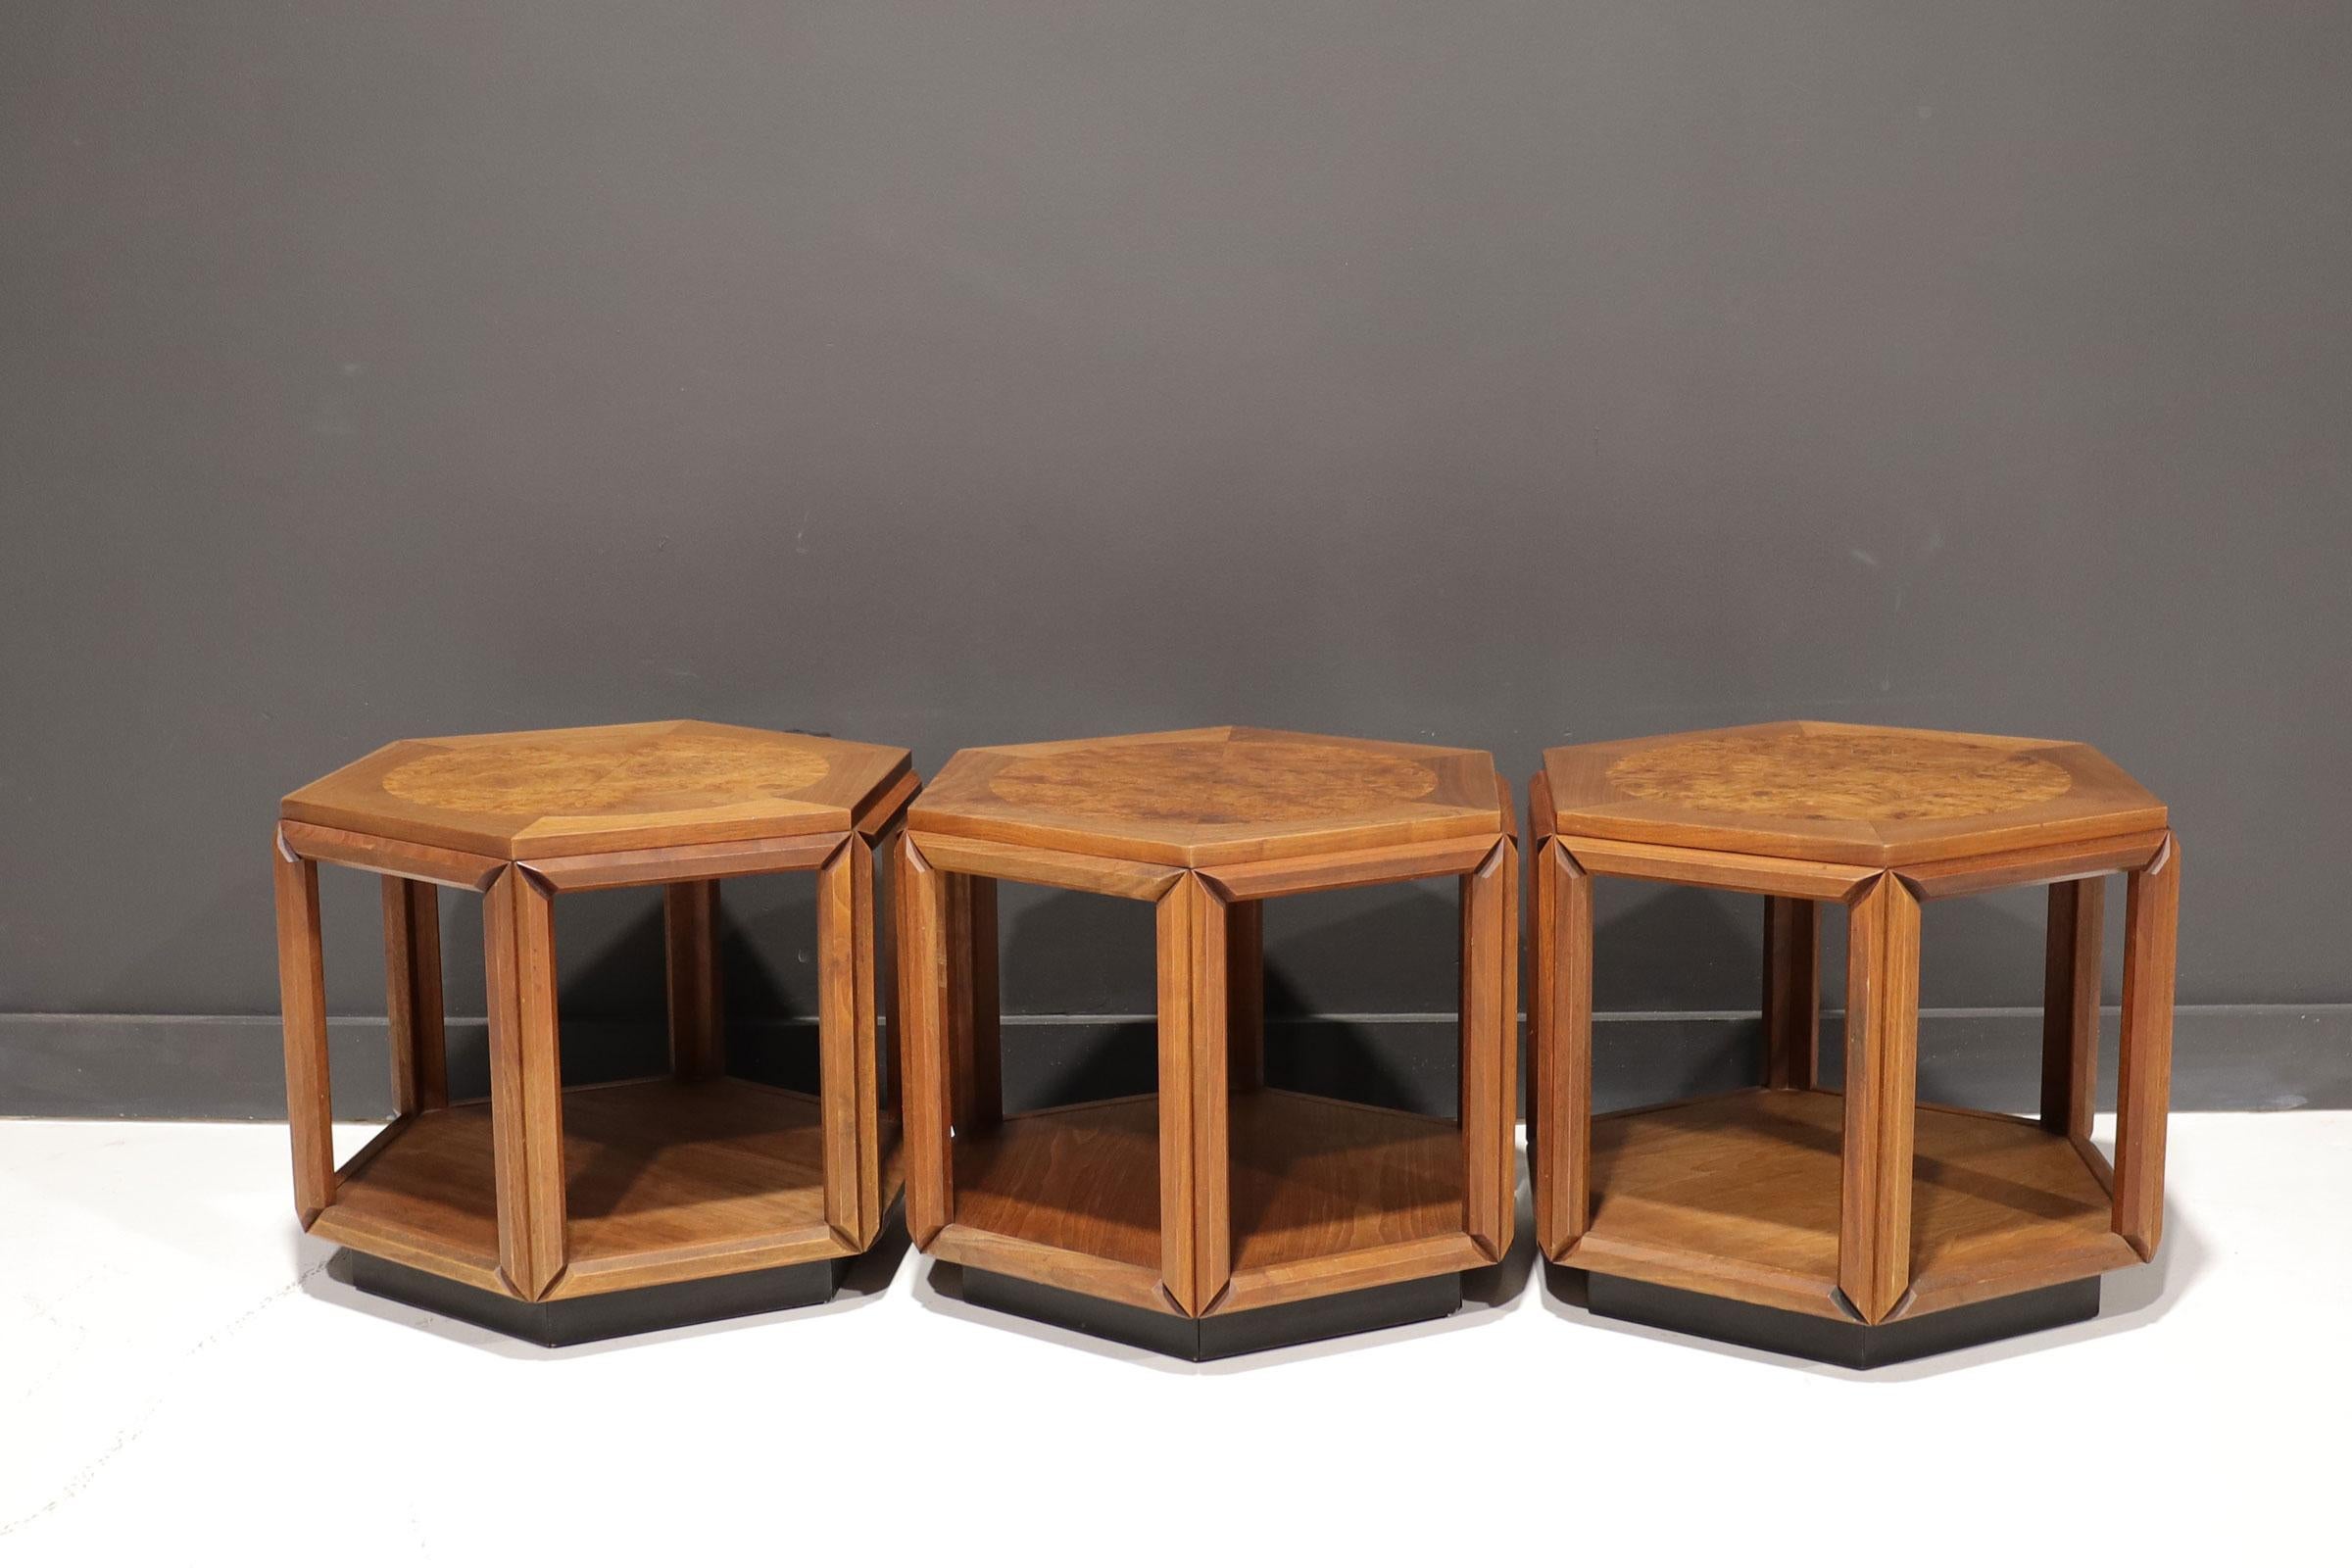 Set of three hexagonal shape side tables design by John Keal for Brown Saltman in the 1970’s.
Constructed of walnut with a burl wood circle on the top.
In beautiful vintage condition with minor wear consistent with age. Arrange them in multiple